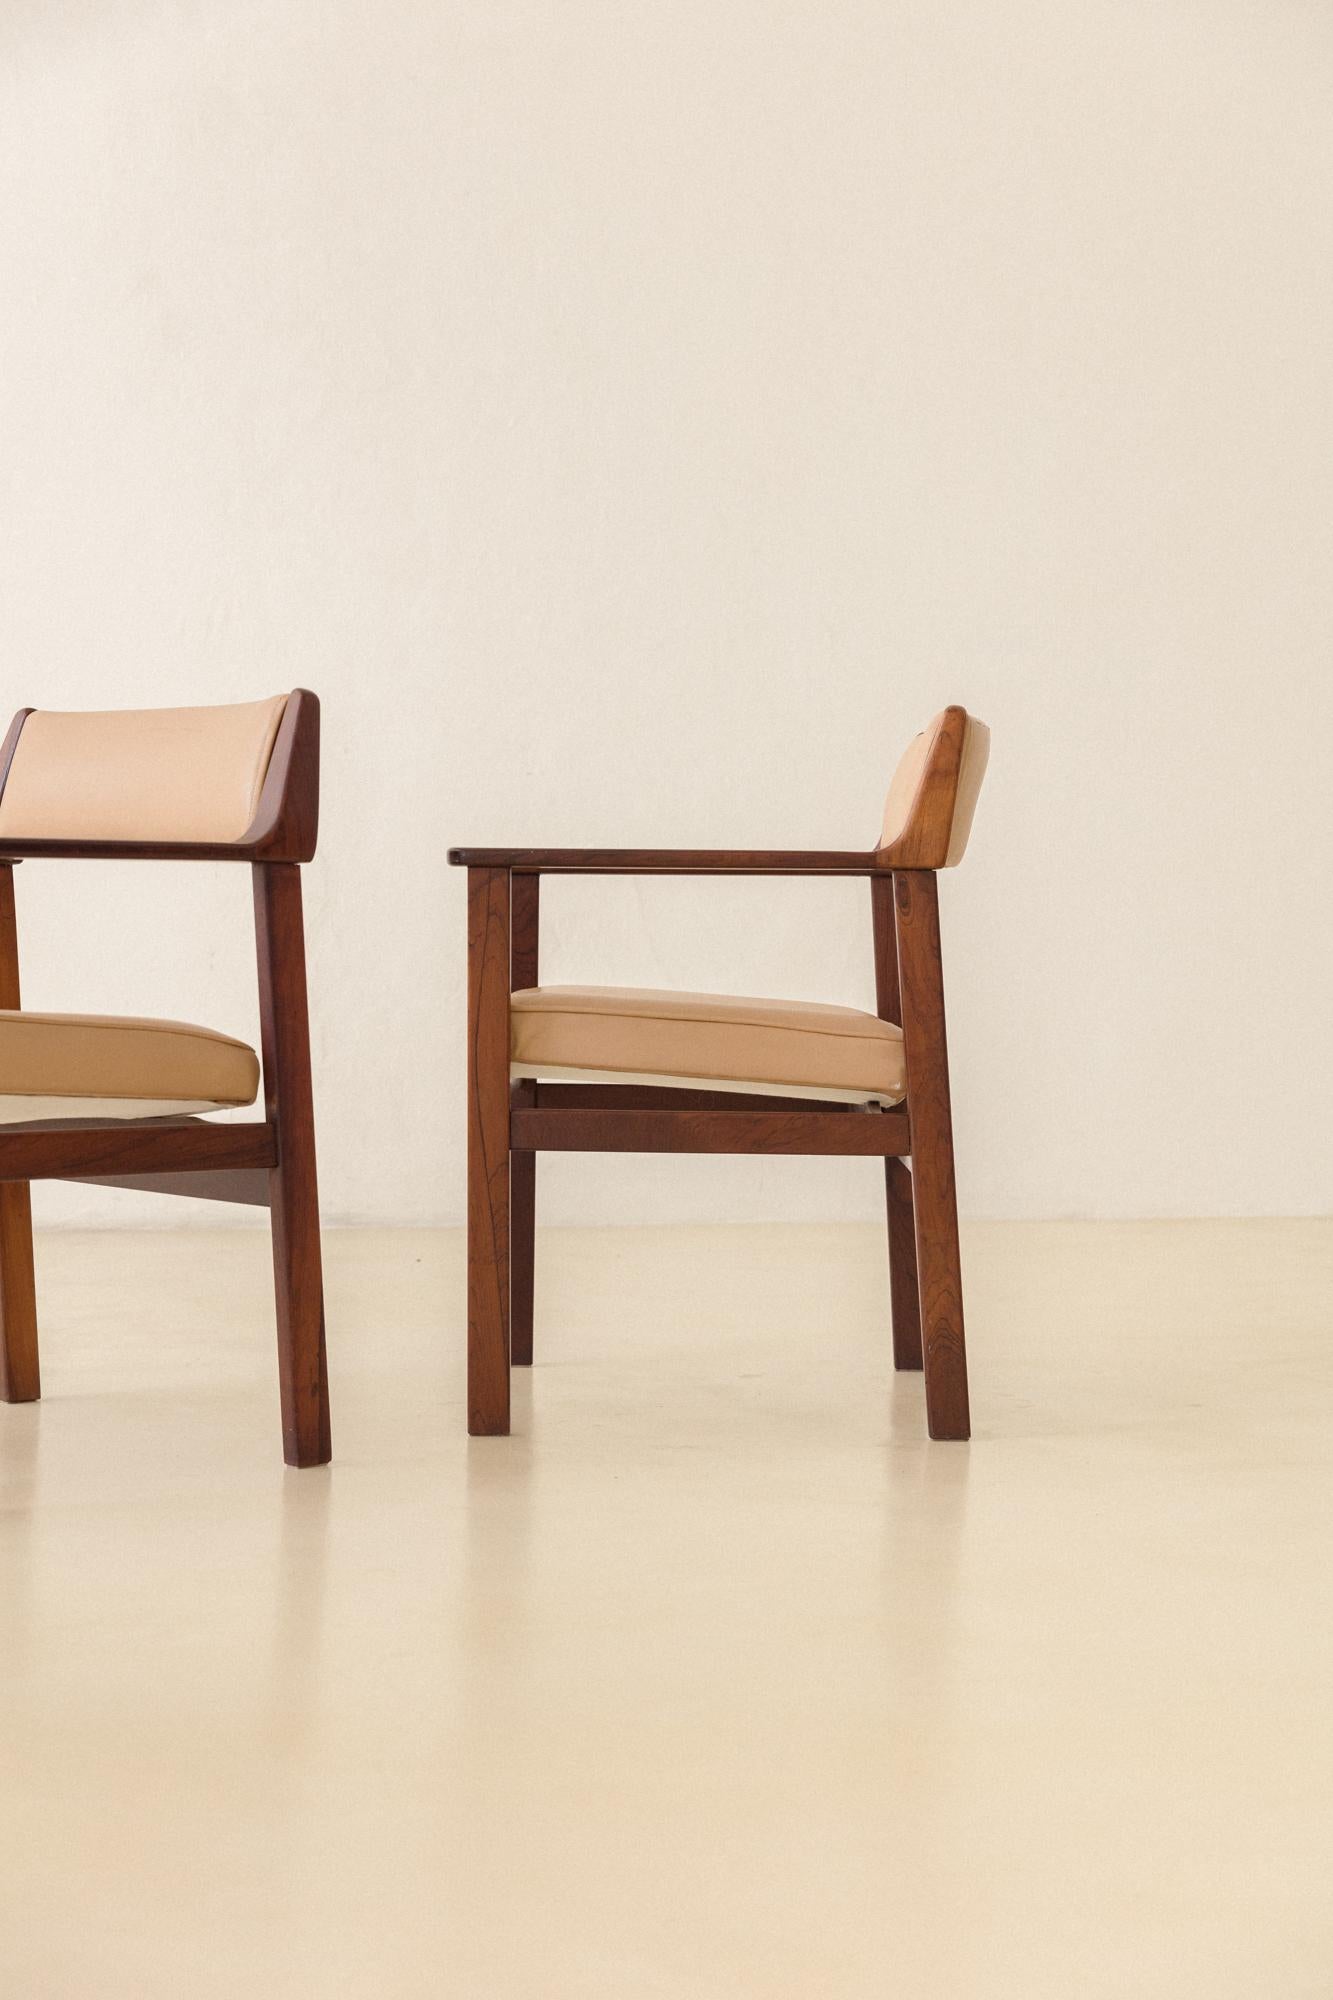 Pair of Solid Rosewood Chairs with Armrests by Brazilian Company Casulo, 1960s For Sale 2